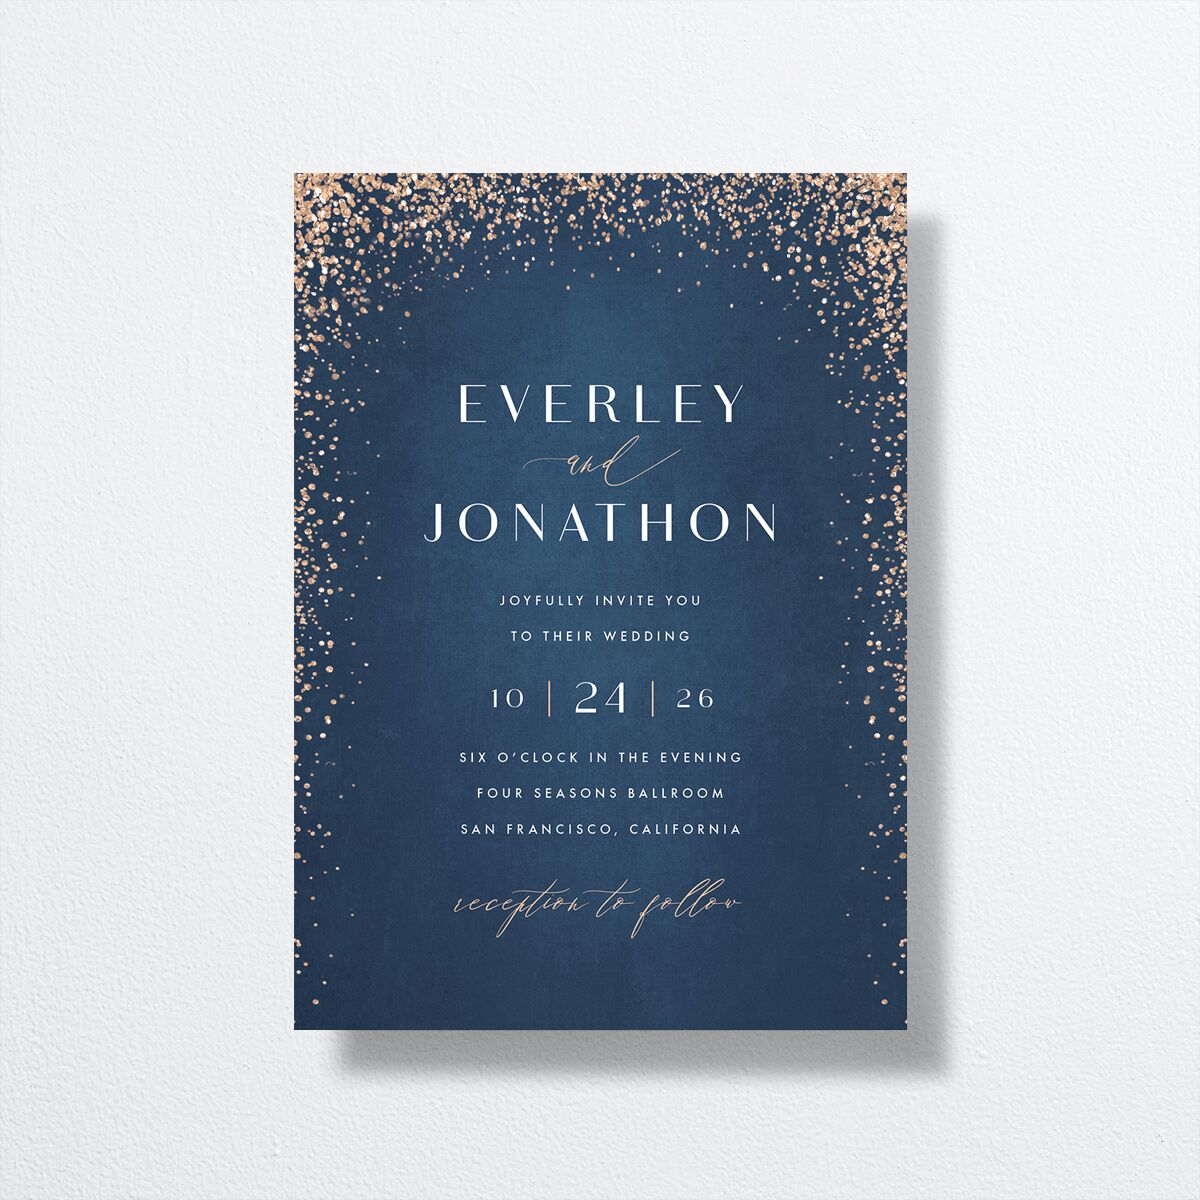 Sparkling Romance Wedding Invitations front in blue